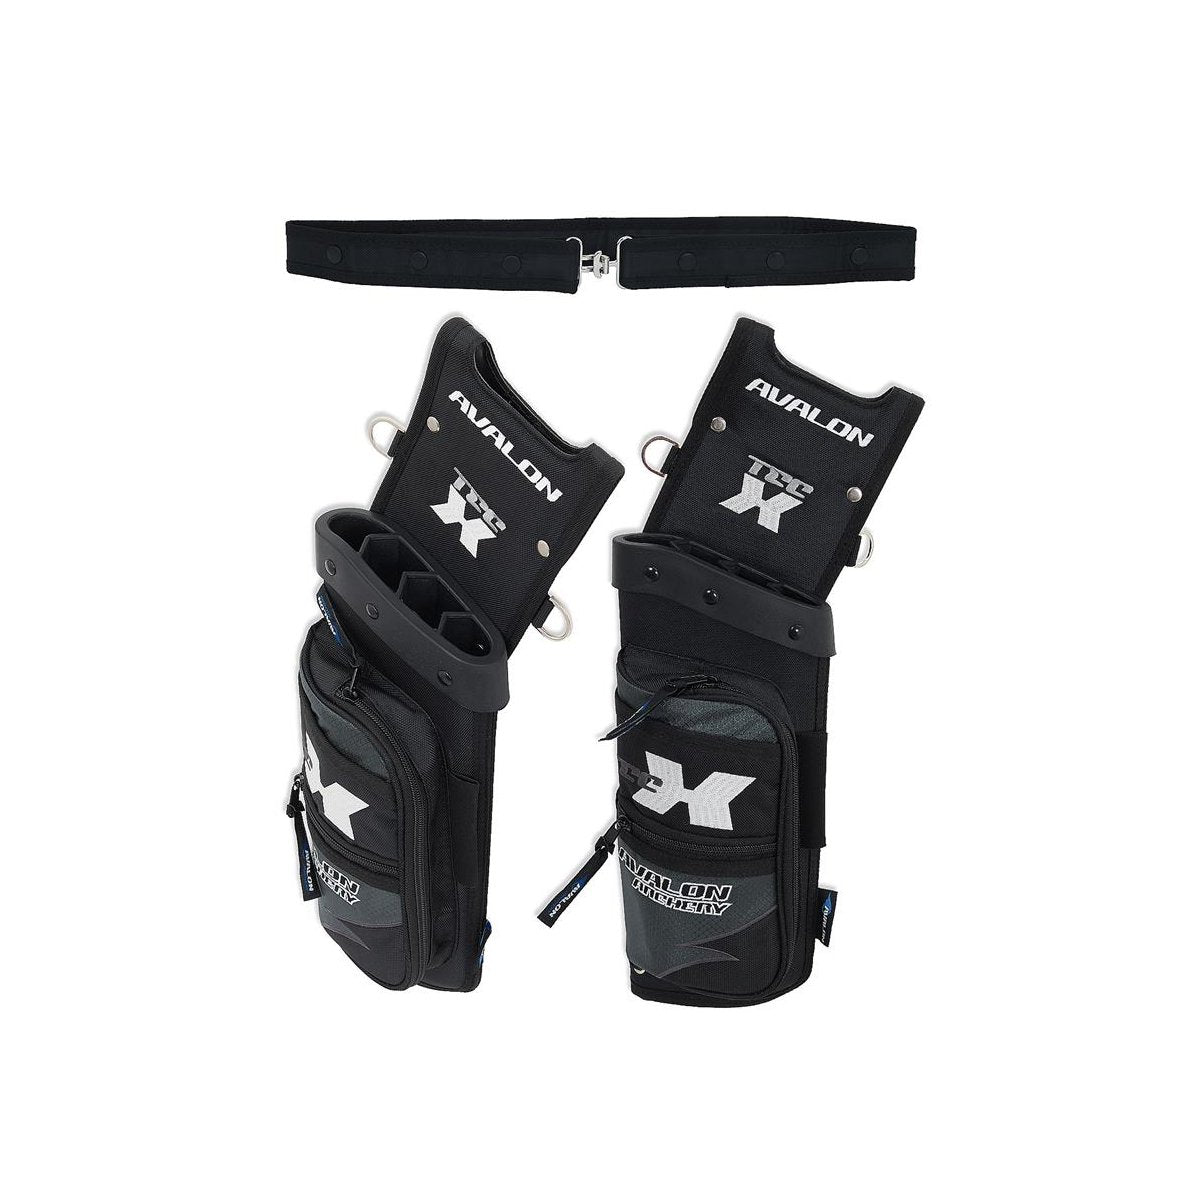 Avalon Tec X Field Quiver with Belt-Canada Archery Online